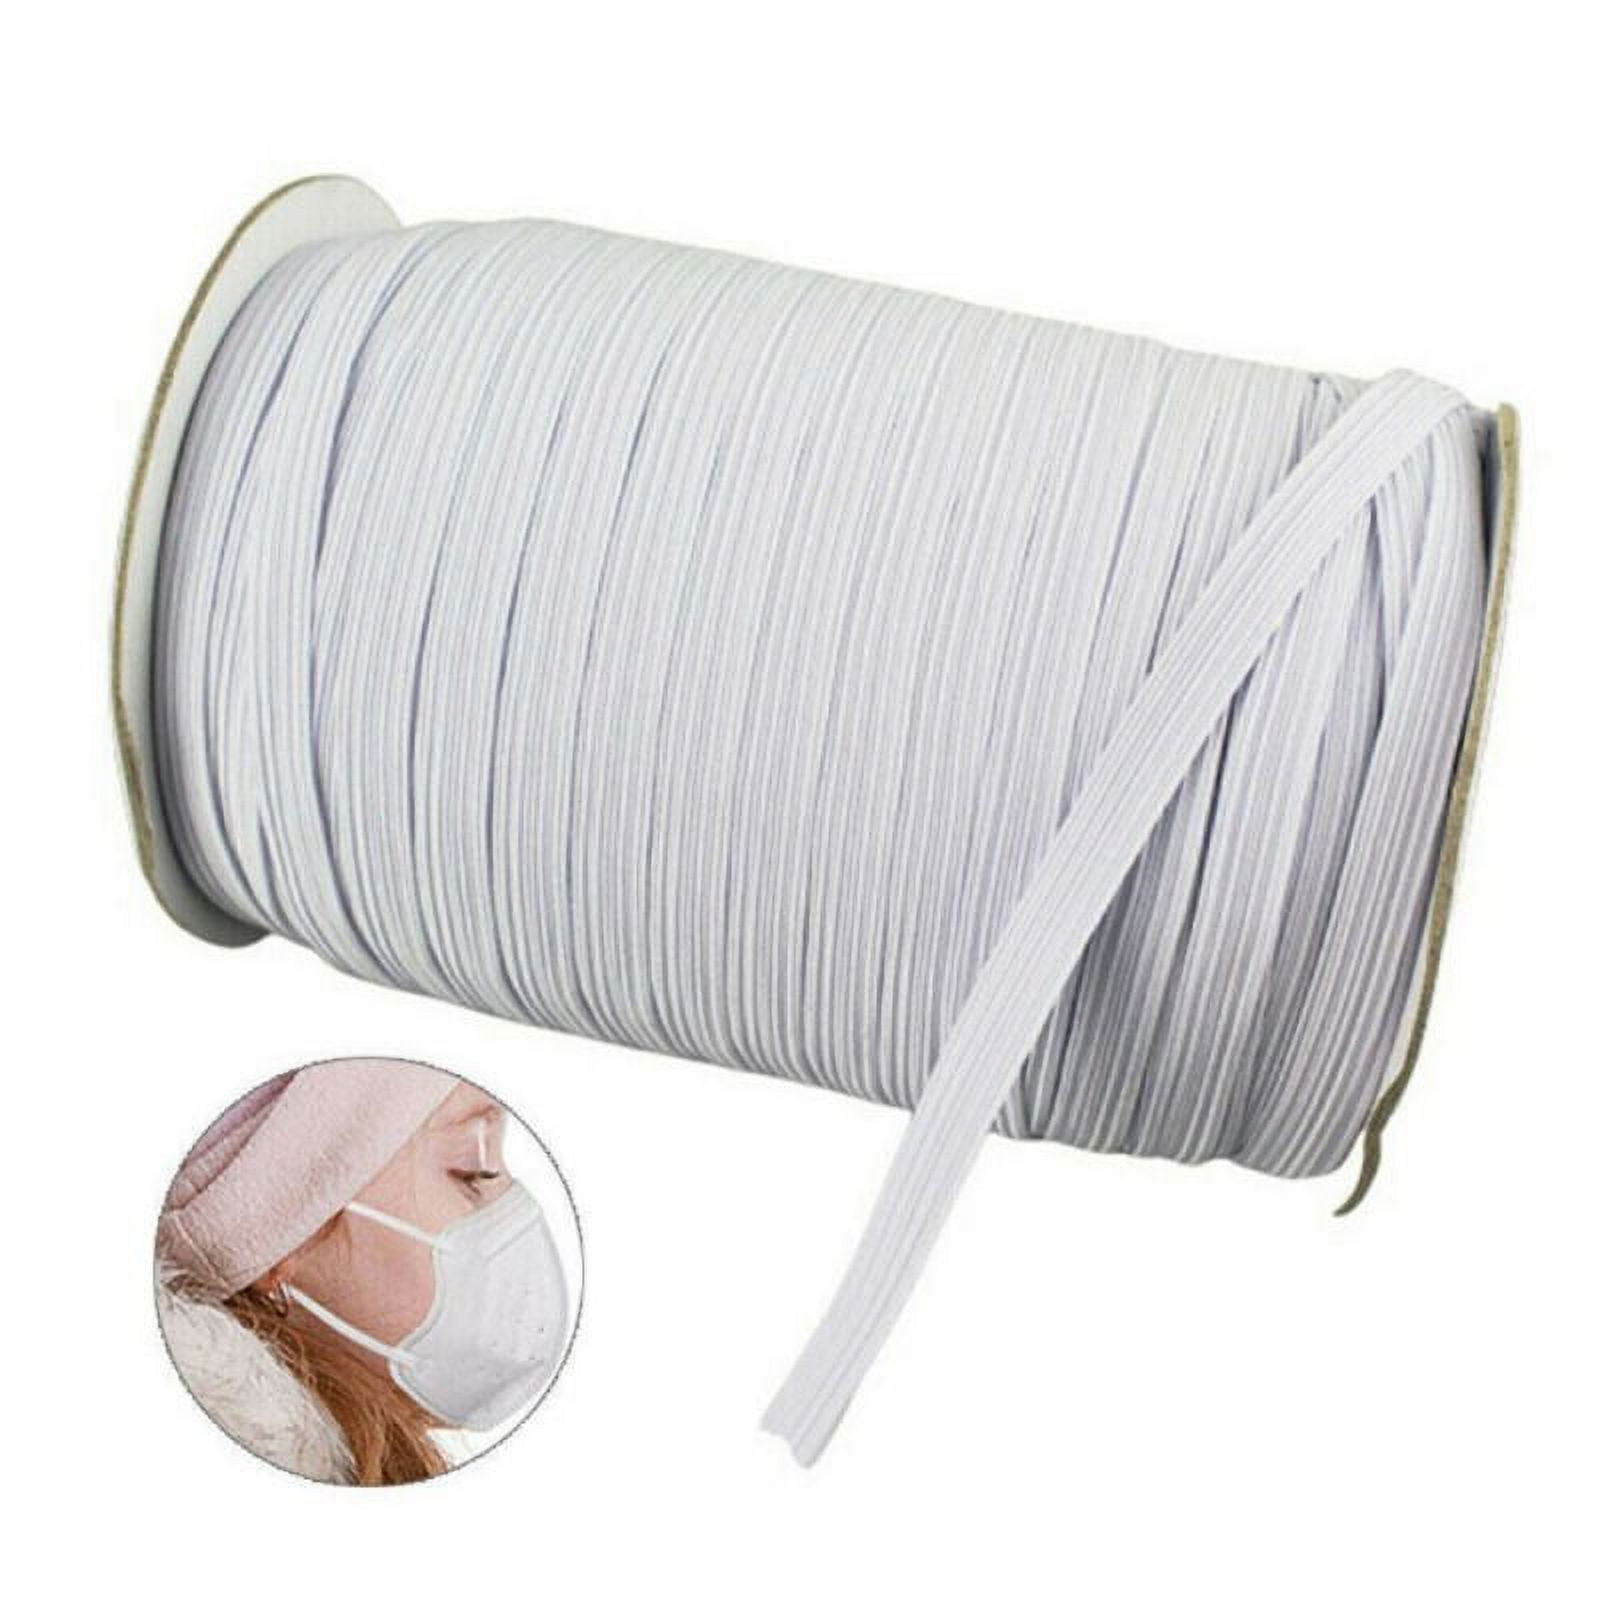 Mandala Crafts Knit Elastic Band for Sewing, Flat Stretch Strap Spool for waistbands, Size: 1.5 Inches 50 Yards, White